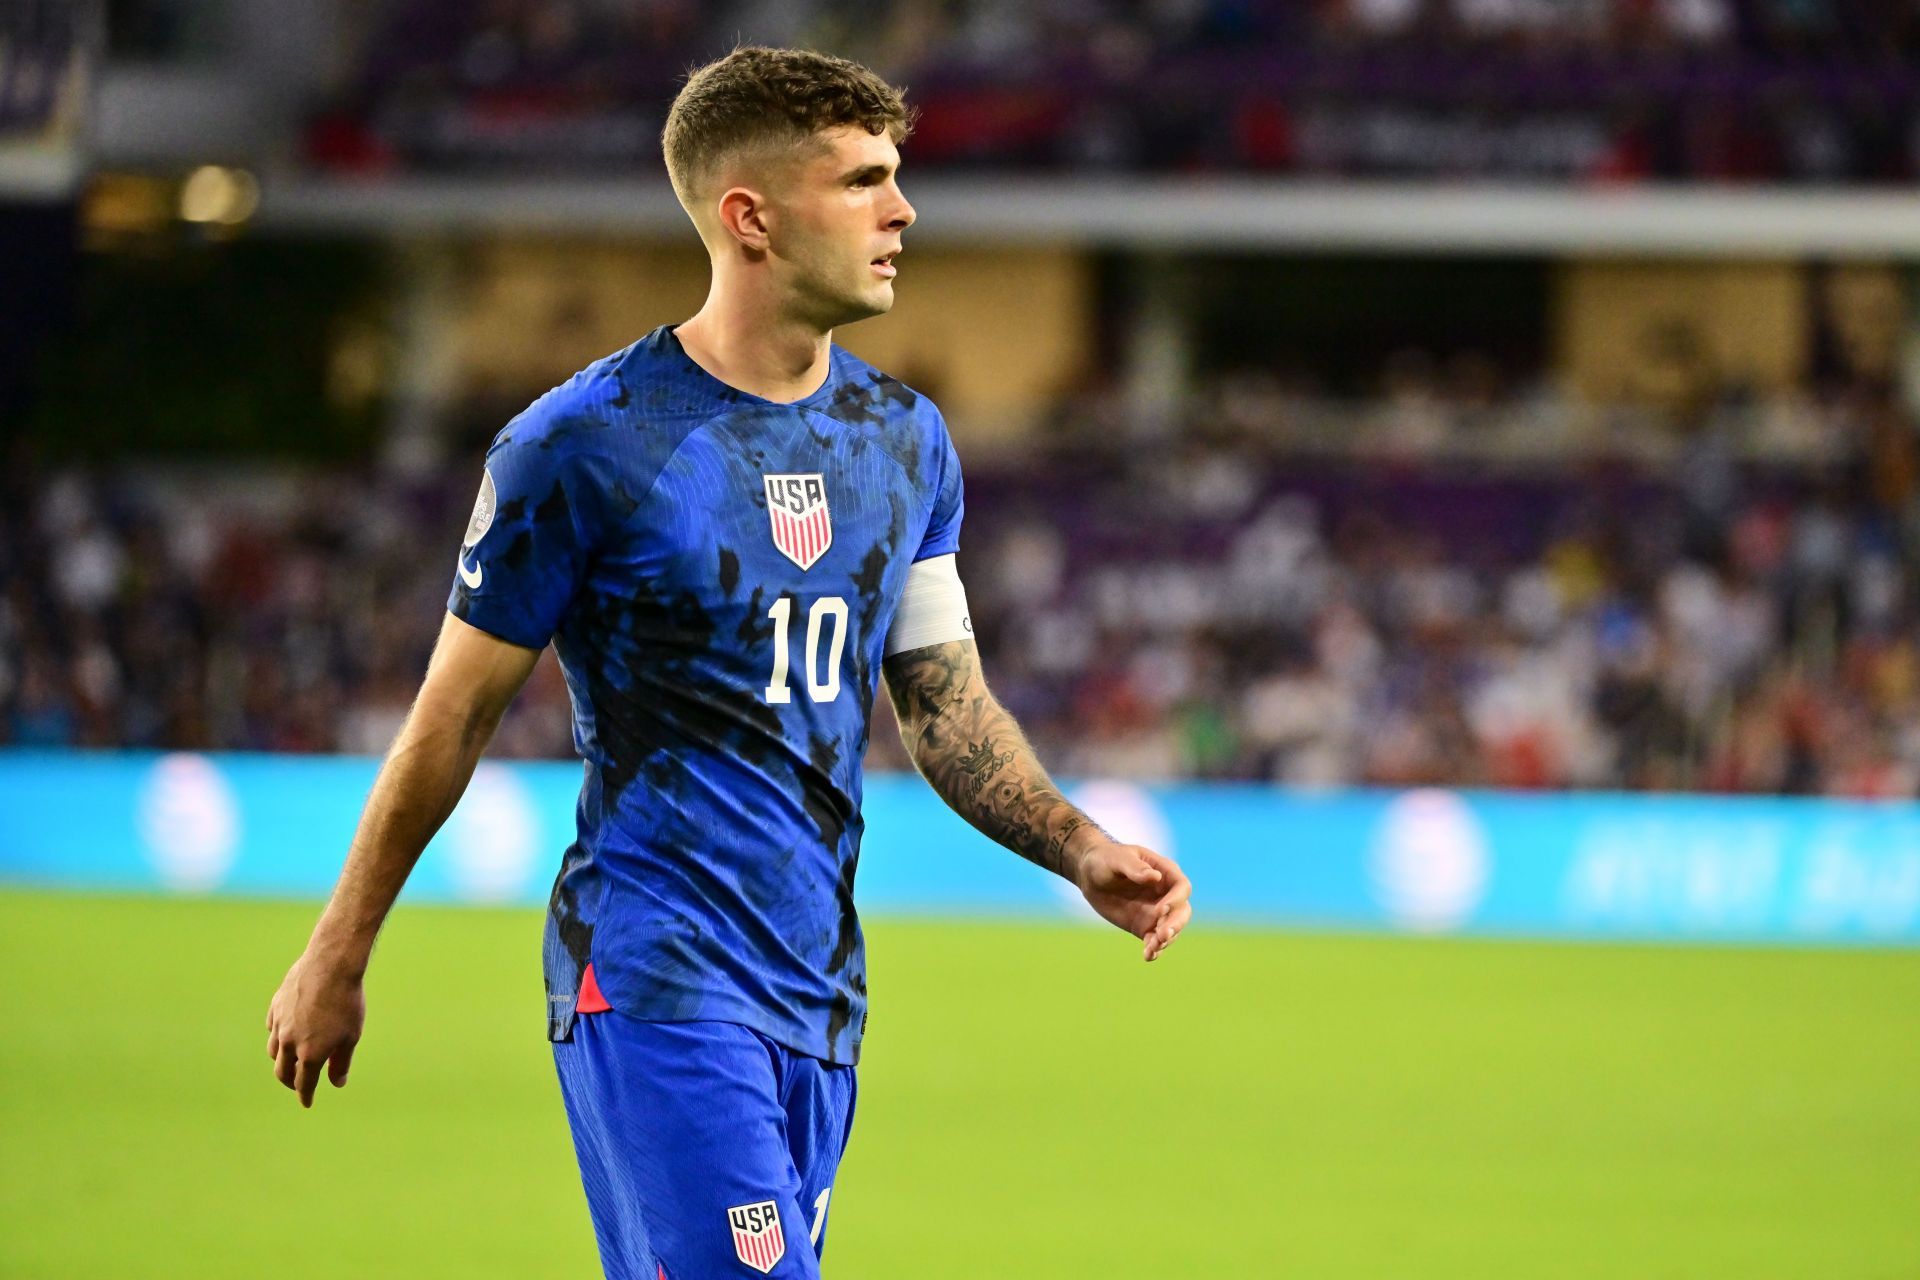 Christian Pulisic could be on his way out of Stamford Bridge this summer.